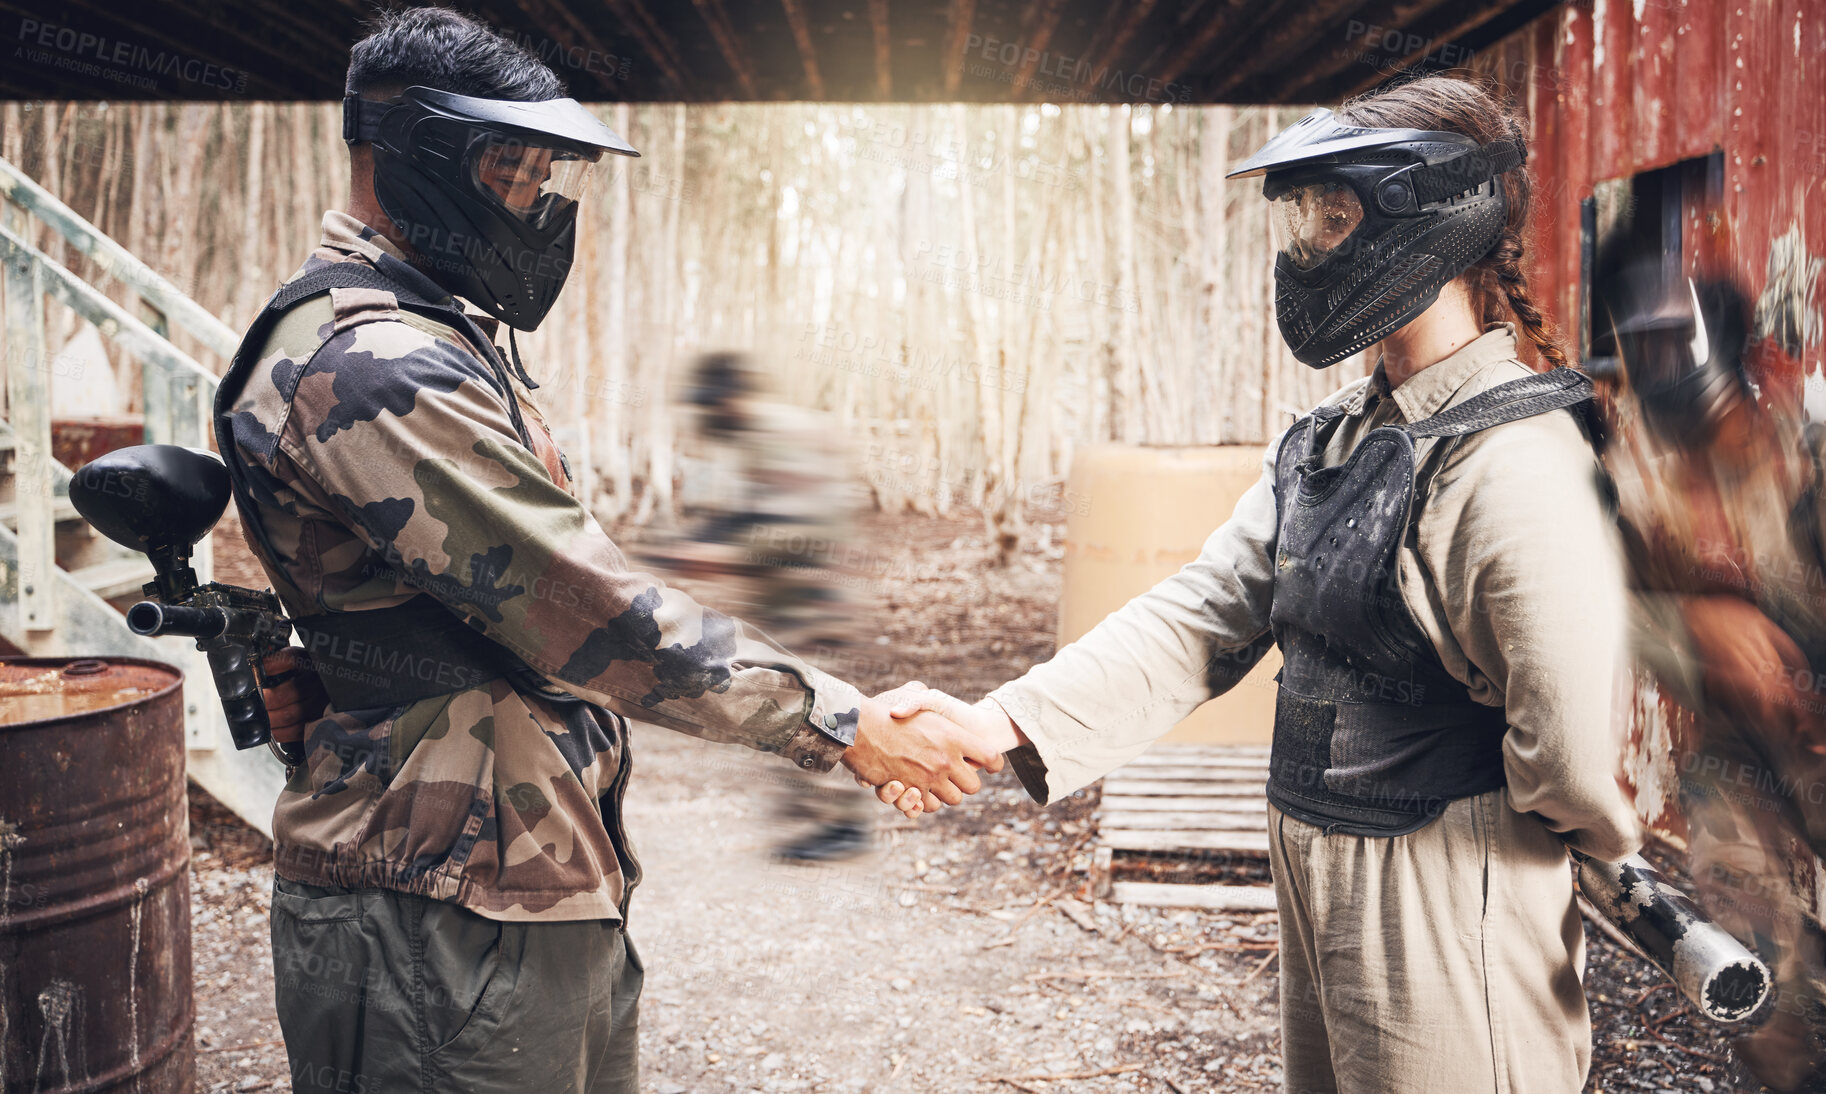 Buy stock photo Handshake, paintball team and congratulations or support, sports game on battlefield and partnership with agreement. Mask for safety, speed and gun, people together on shooting range with trust